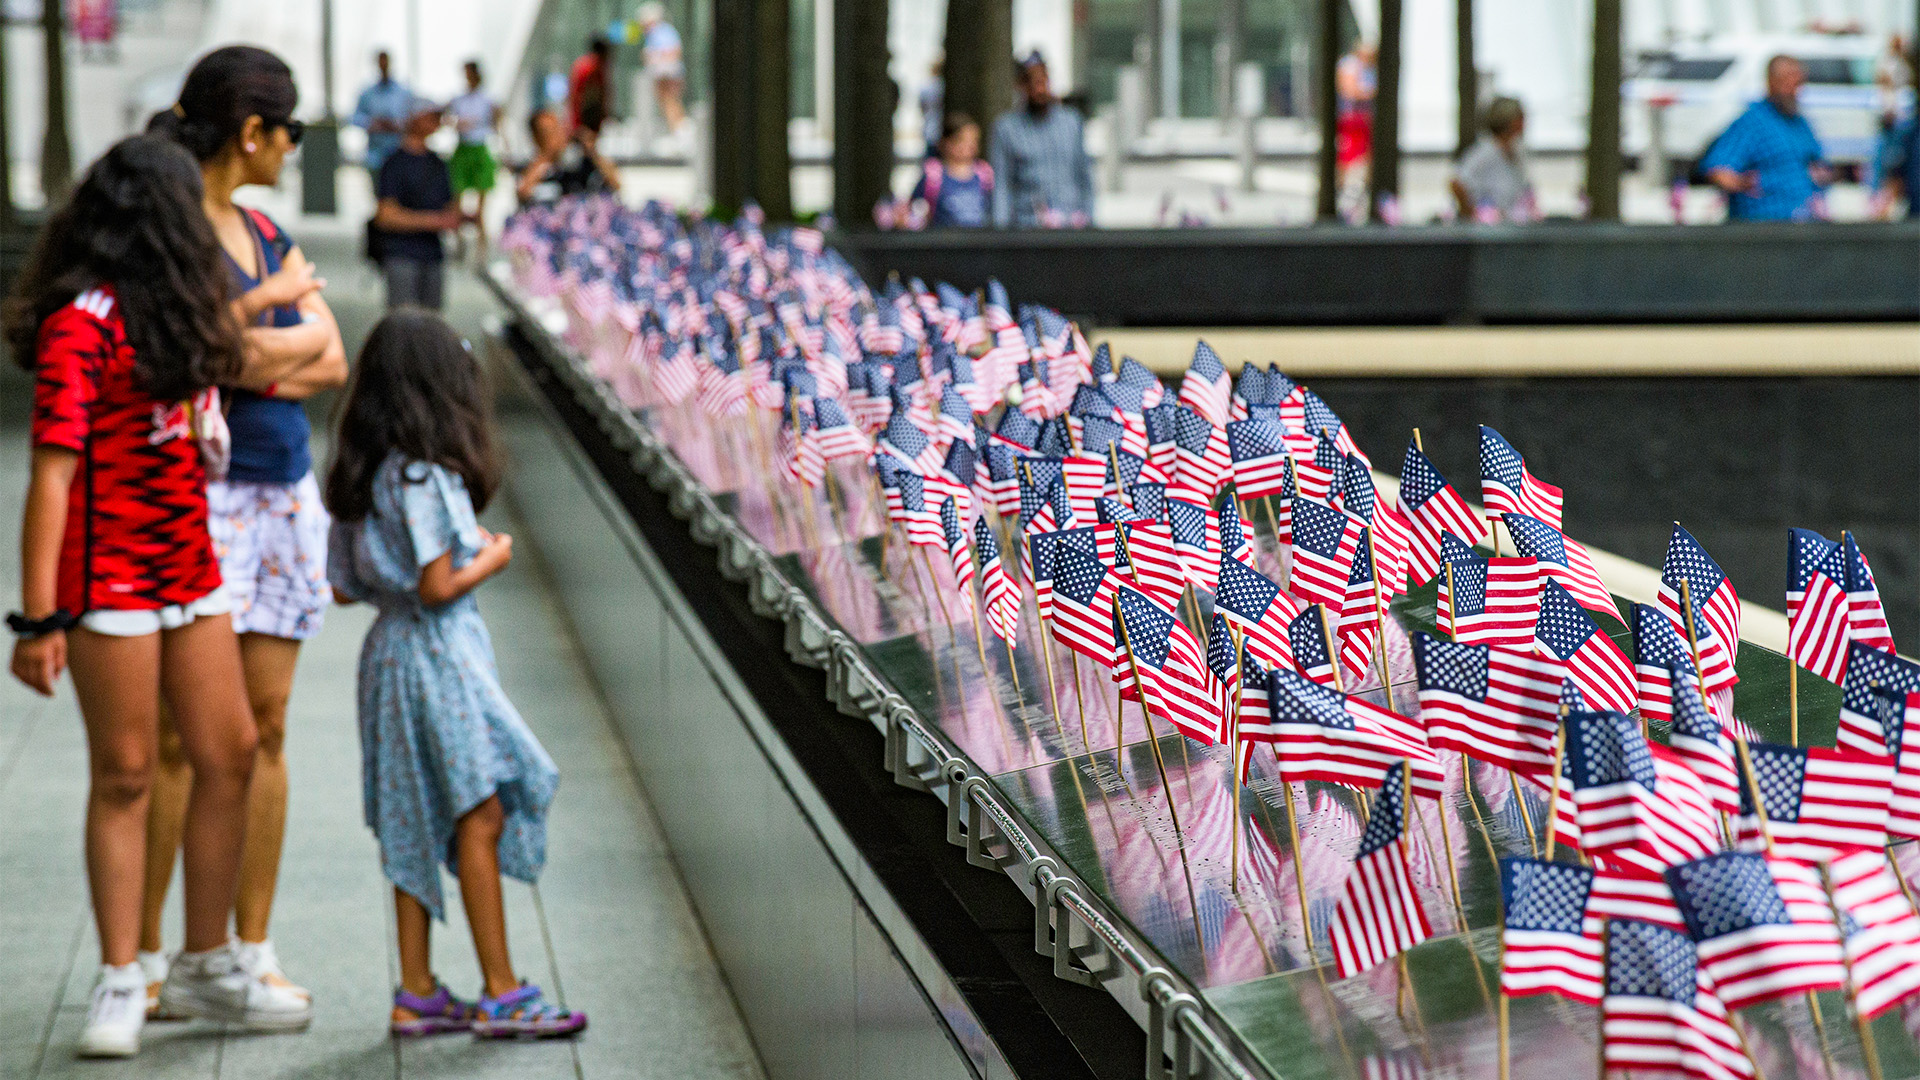 A woman and two younger girls look on at the Memorial, which is lined with small American flags at each victim's name